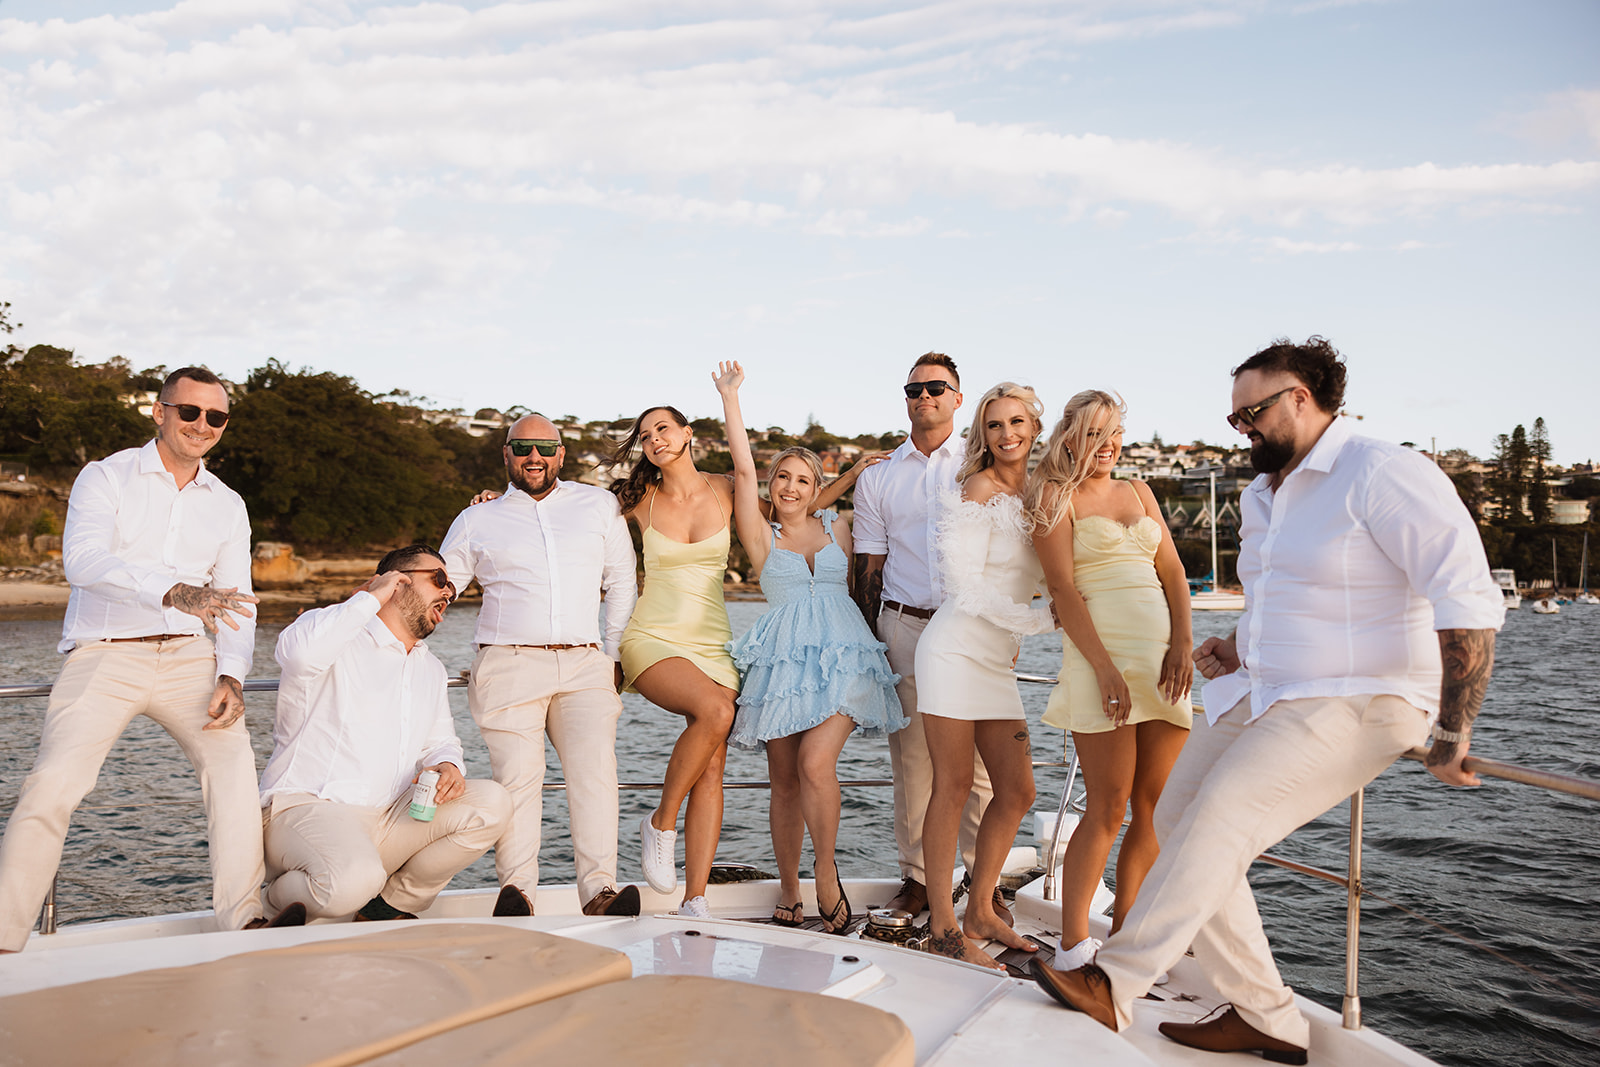 Bridal Party at the Wedding in Lindesay House, Darling Point New South Wales